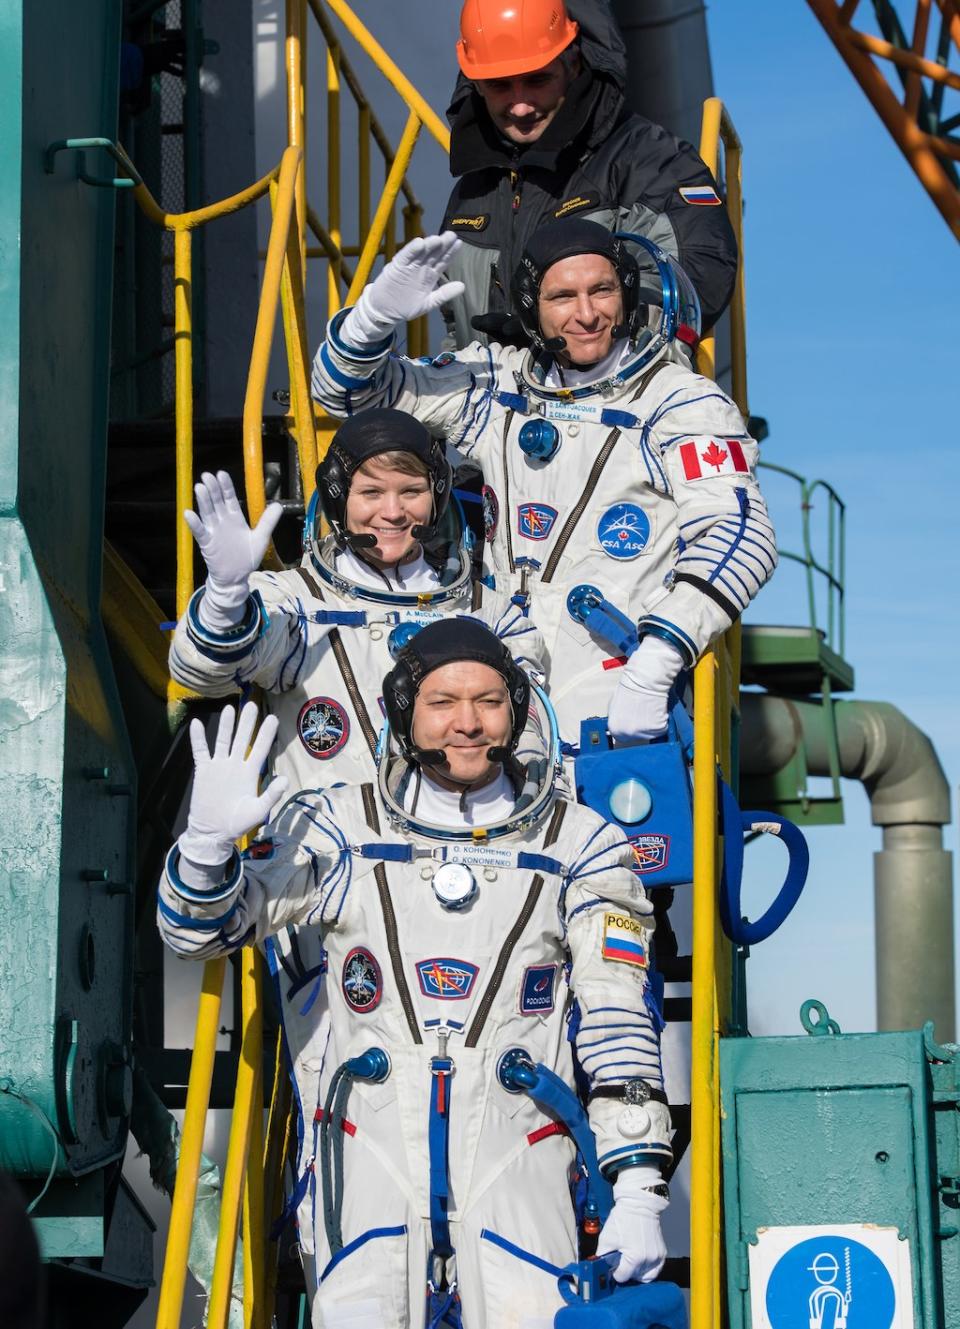 The Expedition 58 crew bids farewell to Earth as they wave to well-wishers at the base of their Soyuz rocket. From top, the crew is: Flight Engineer David Saint-Jacques of the Canadian Space Agency (CSA), top, Flight Engineer Anne McClain of NASA, center, and Soyuz Commander Oleg Kononenko of Roscosmos. <cite>NASA/Aubrey Gemignani</cite>